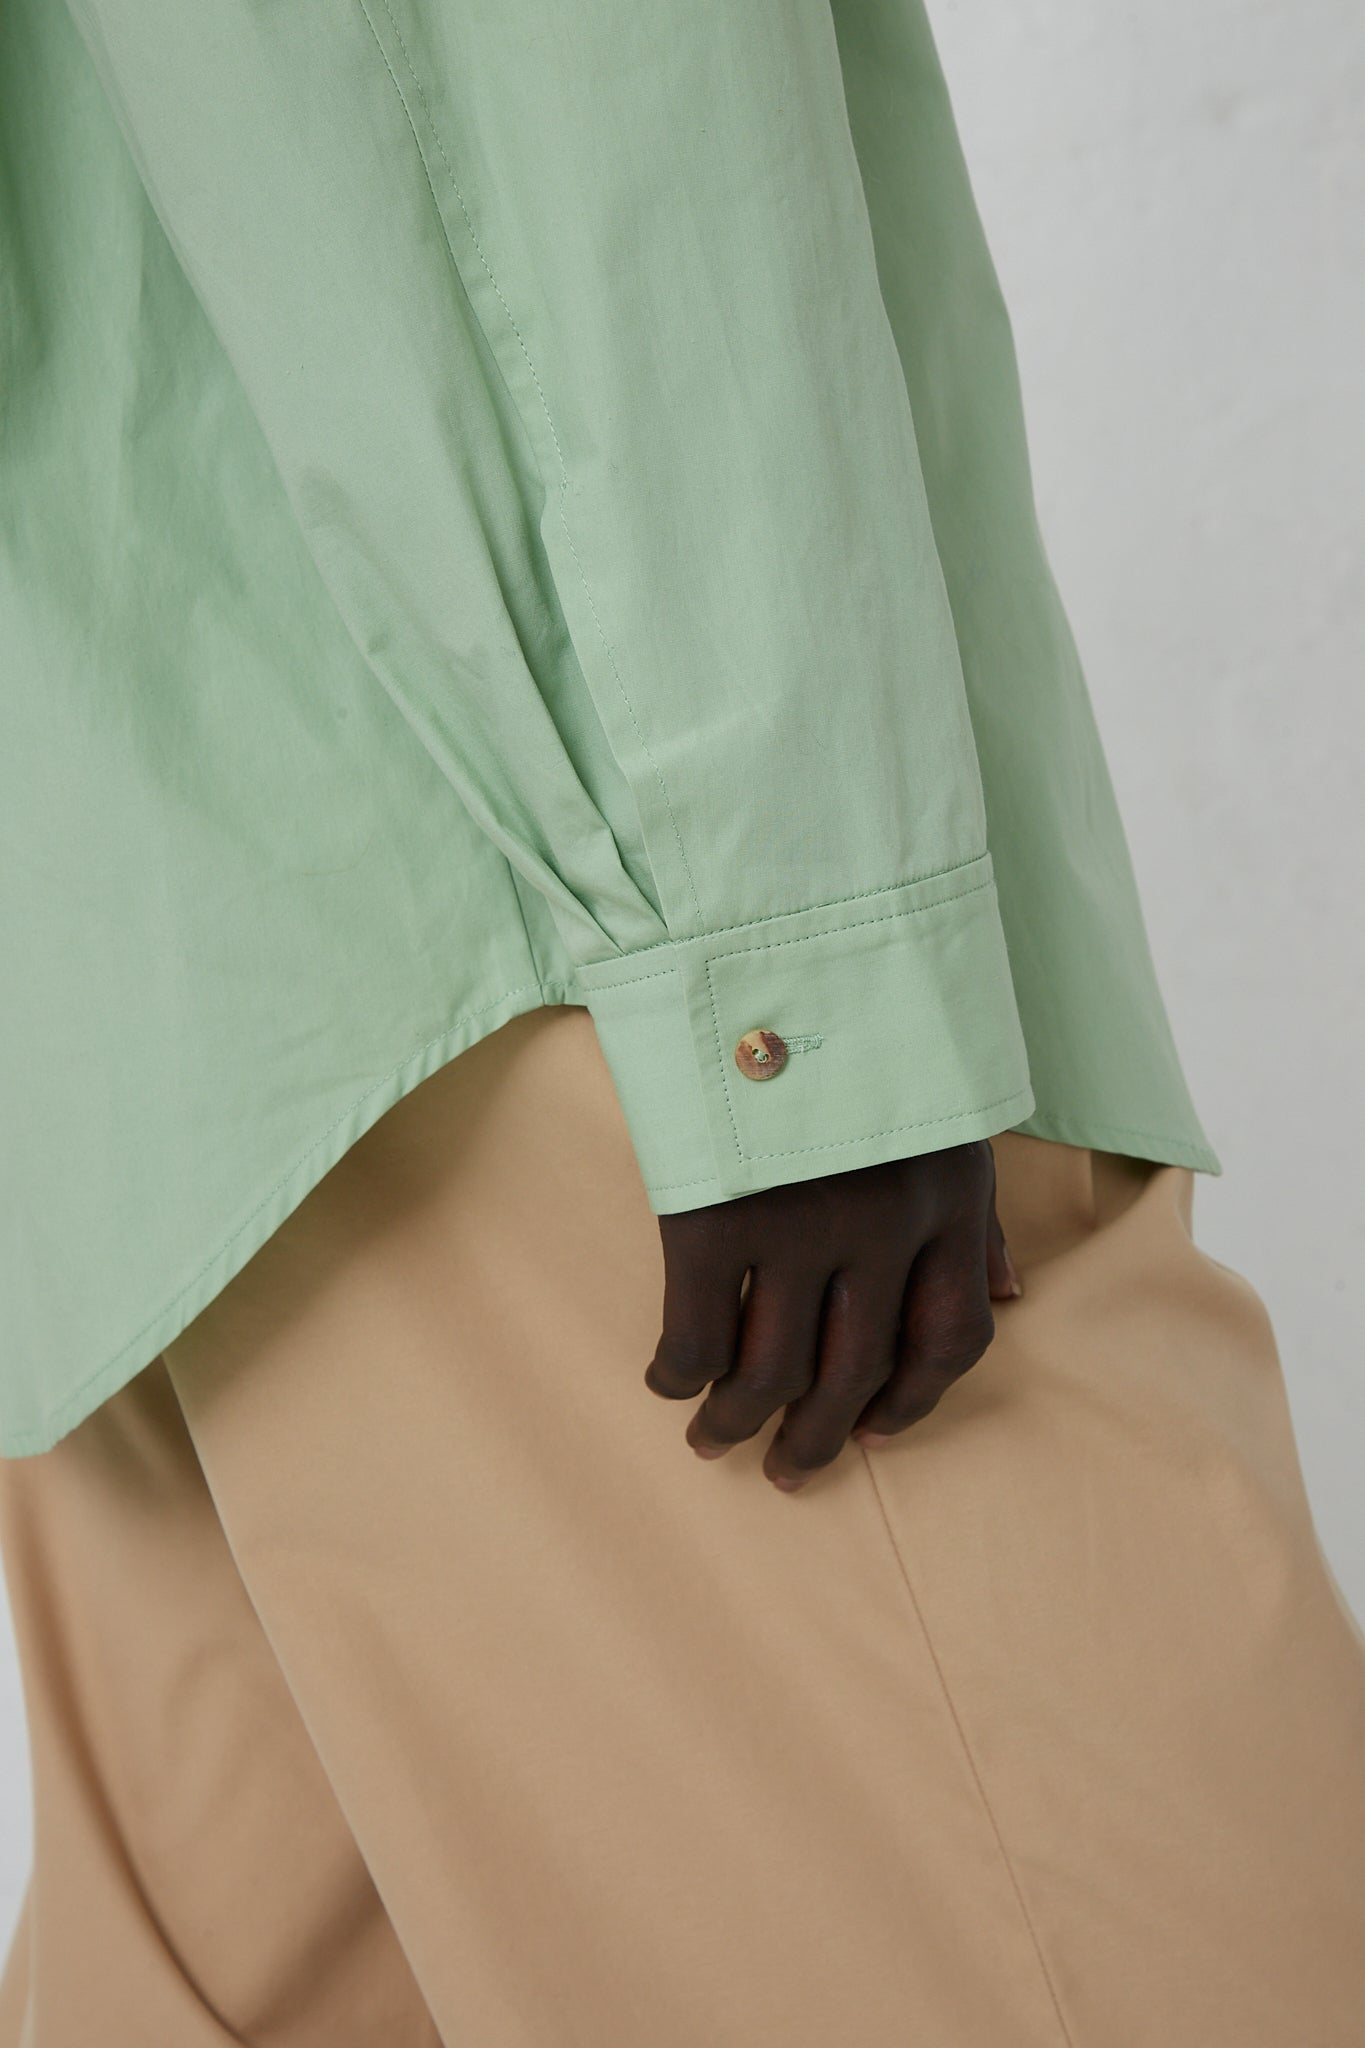 A woman wearing a Rejina Pyo Organic Cotton Caprice Shirt in Mint with a front button closure and tan pants.